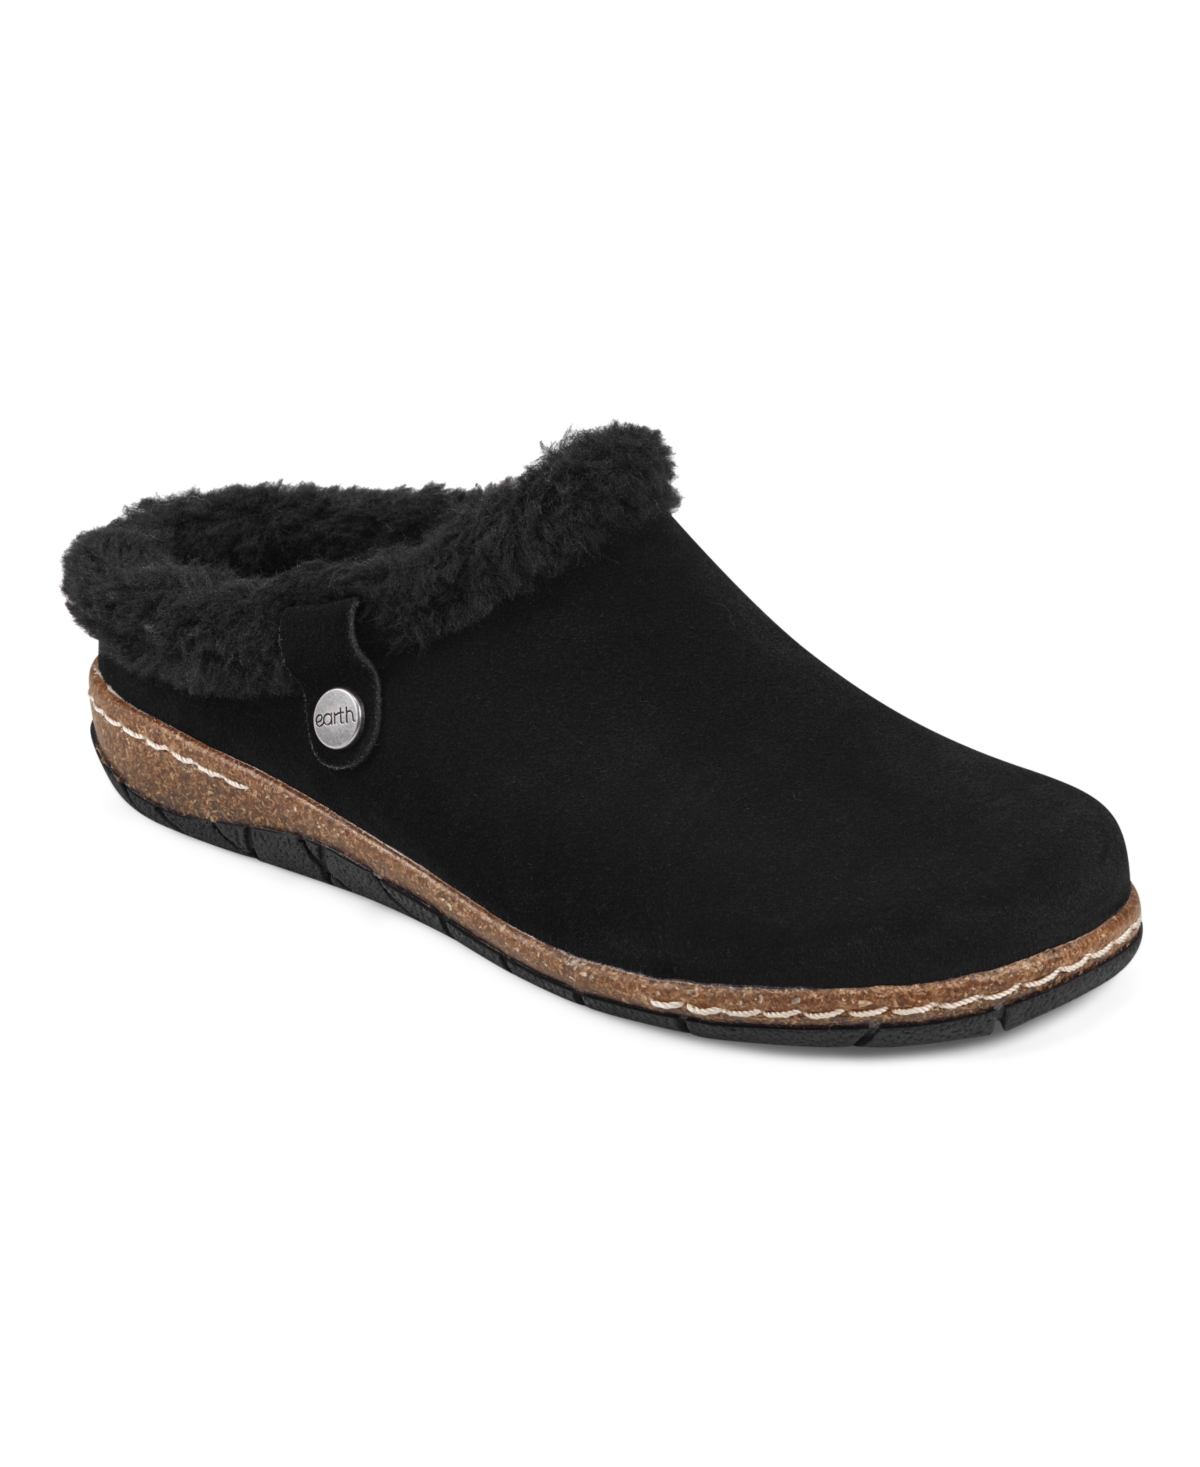 Earth Women's Elena Cold Weather Round Toe Casual Slip On Clogs - Medium Natural Suede, Faux Fur